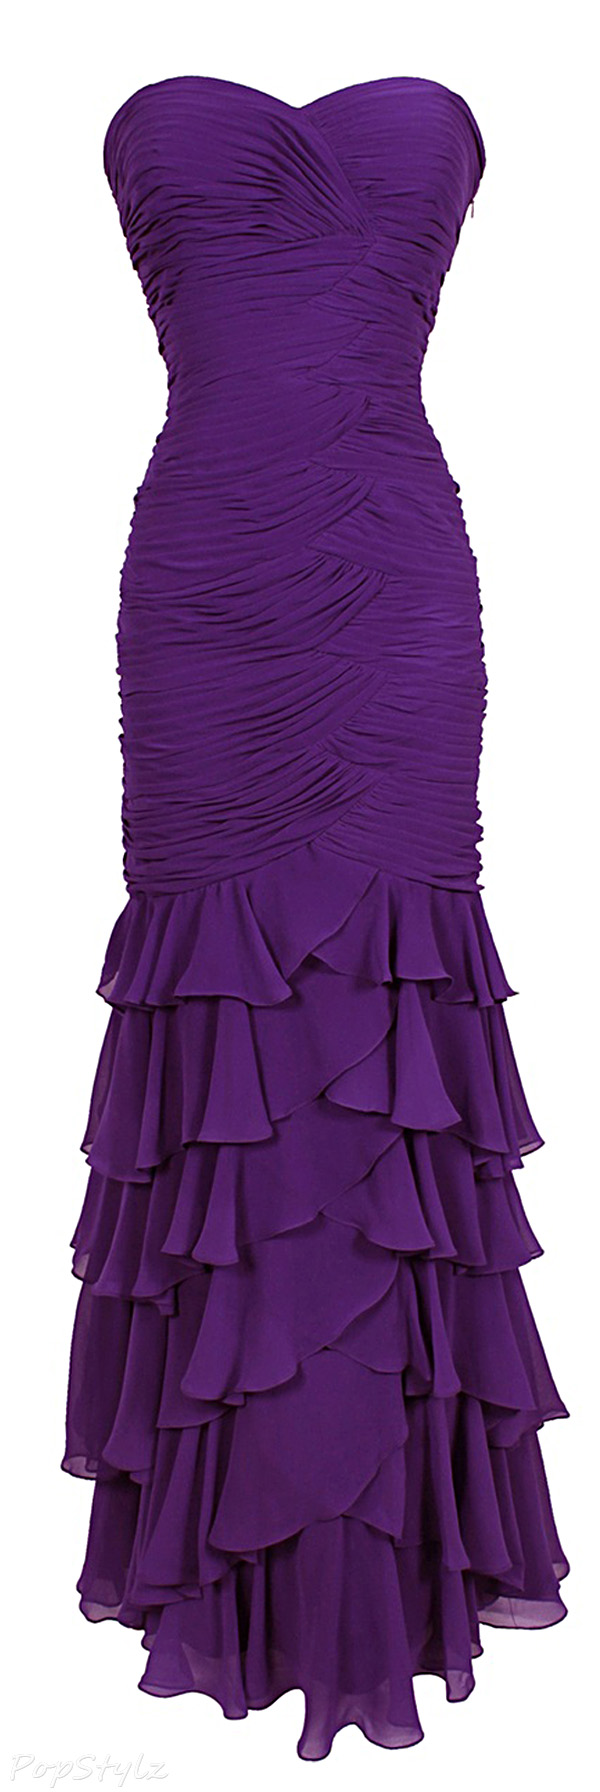 PacificPlex Tiered Chiffon Formal Gown